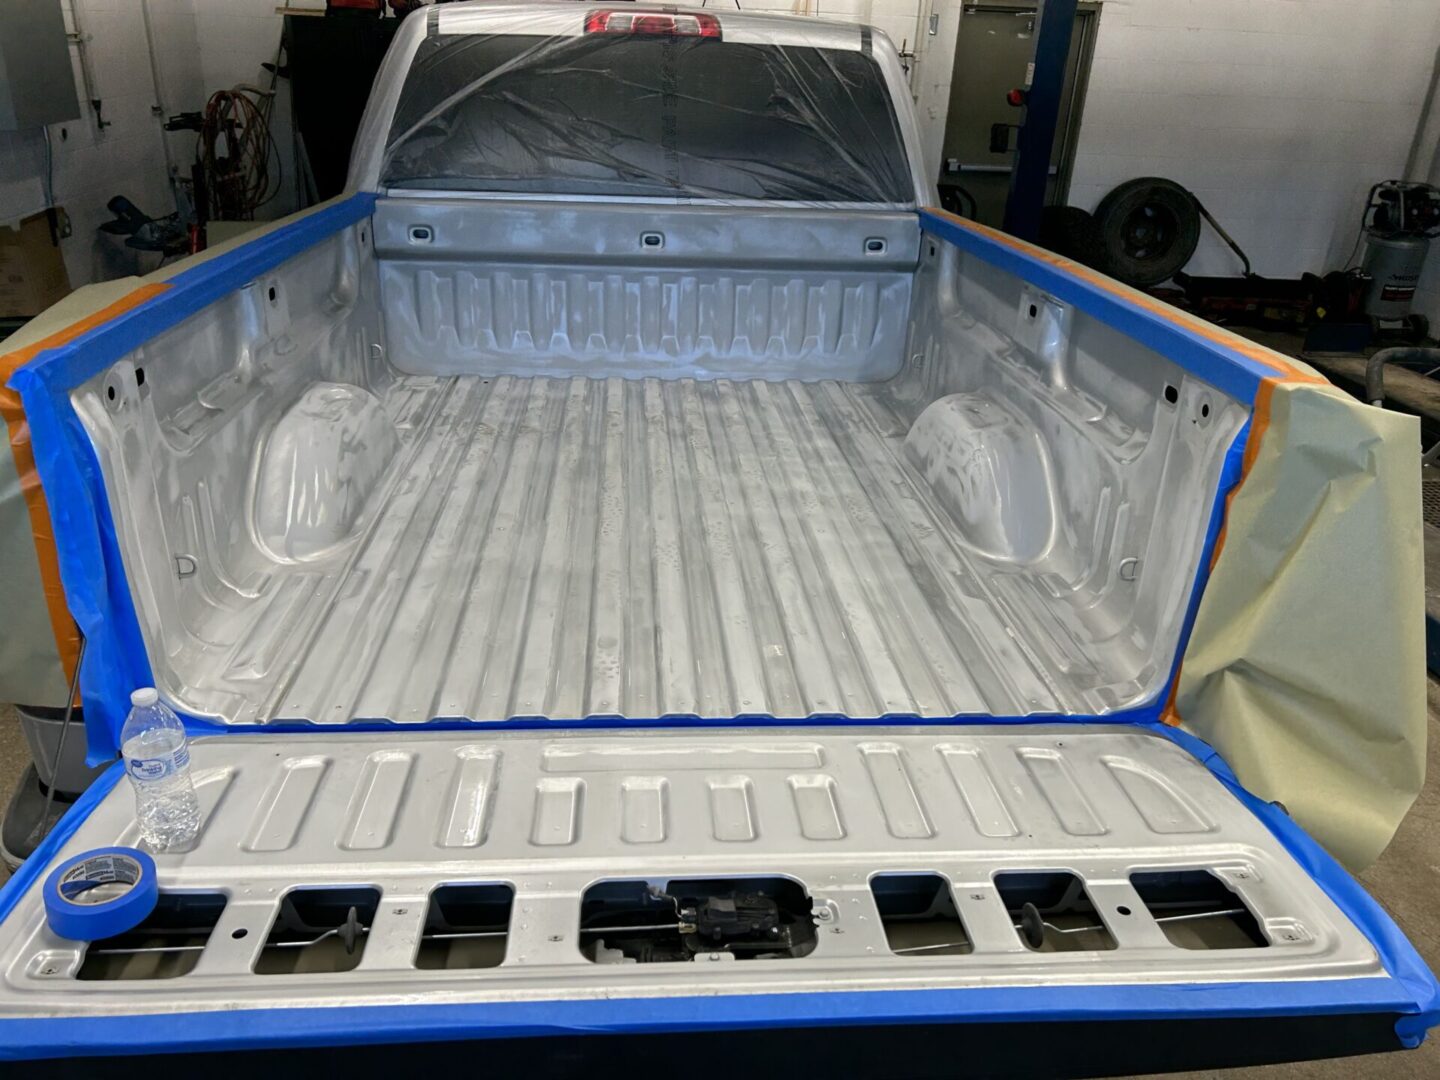 A truck bed with blue paint on it.